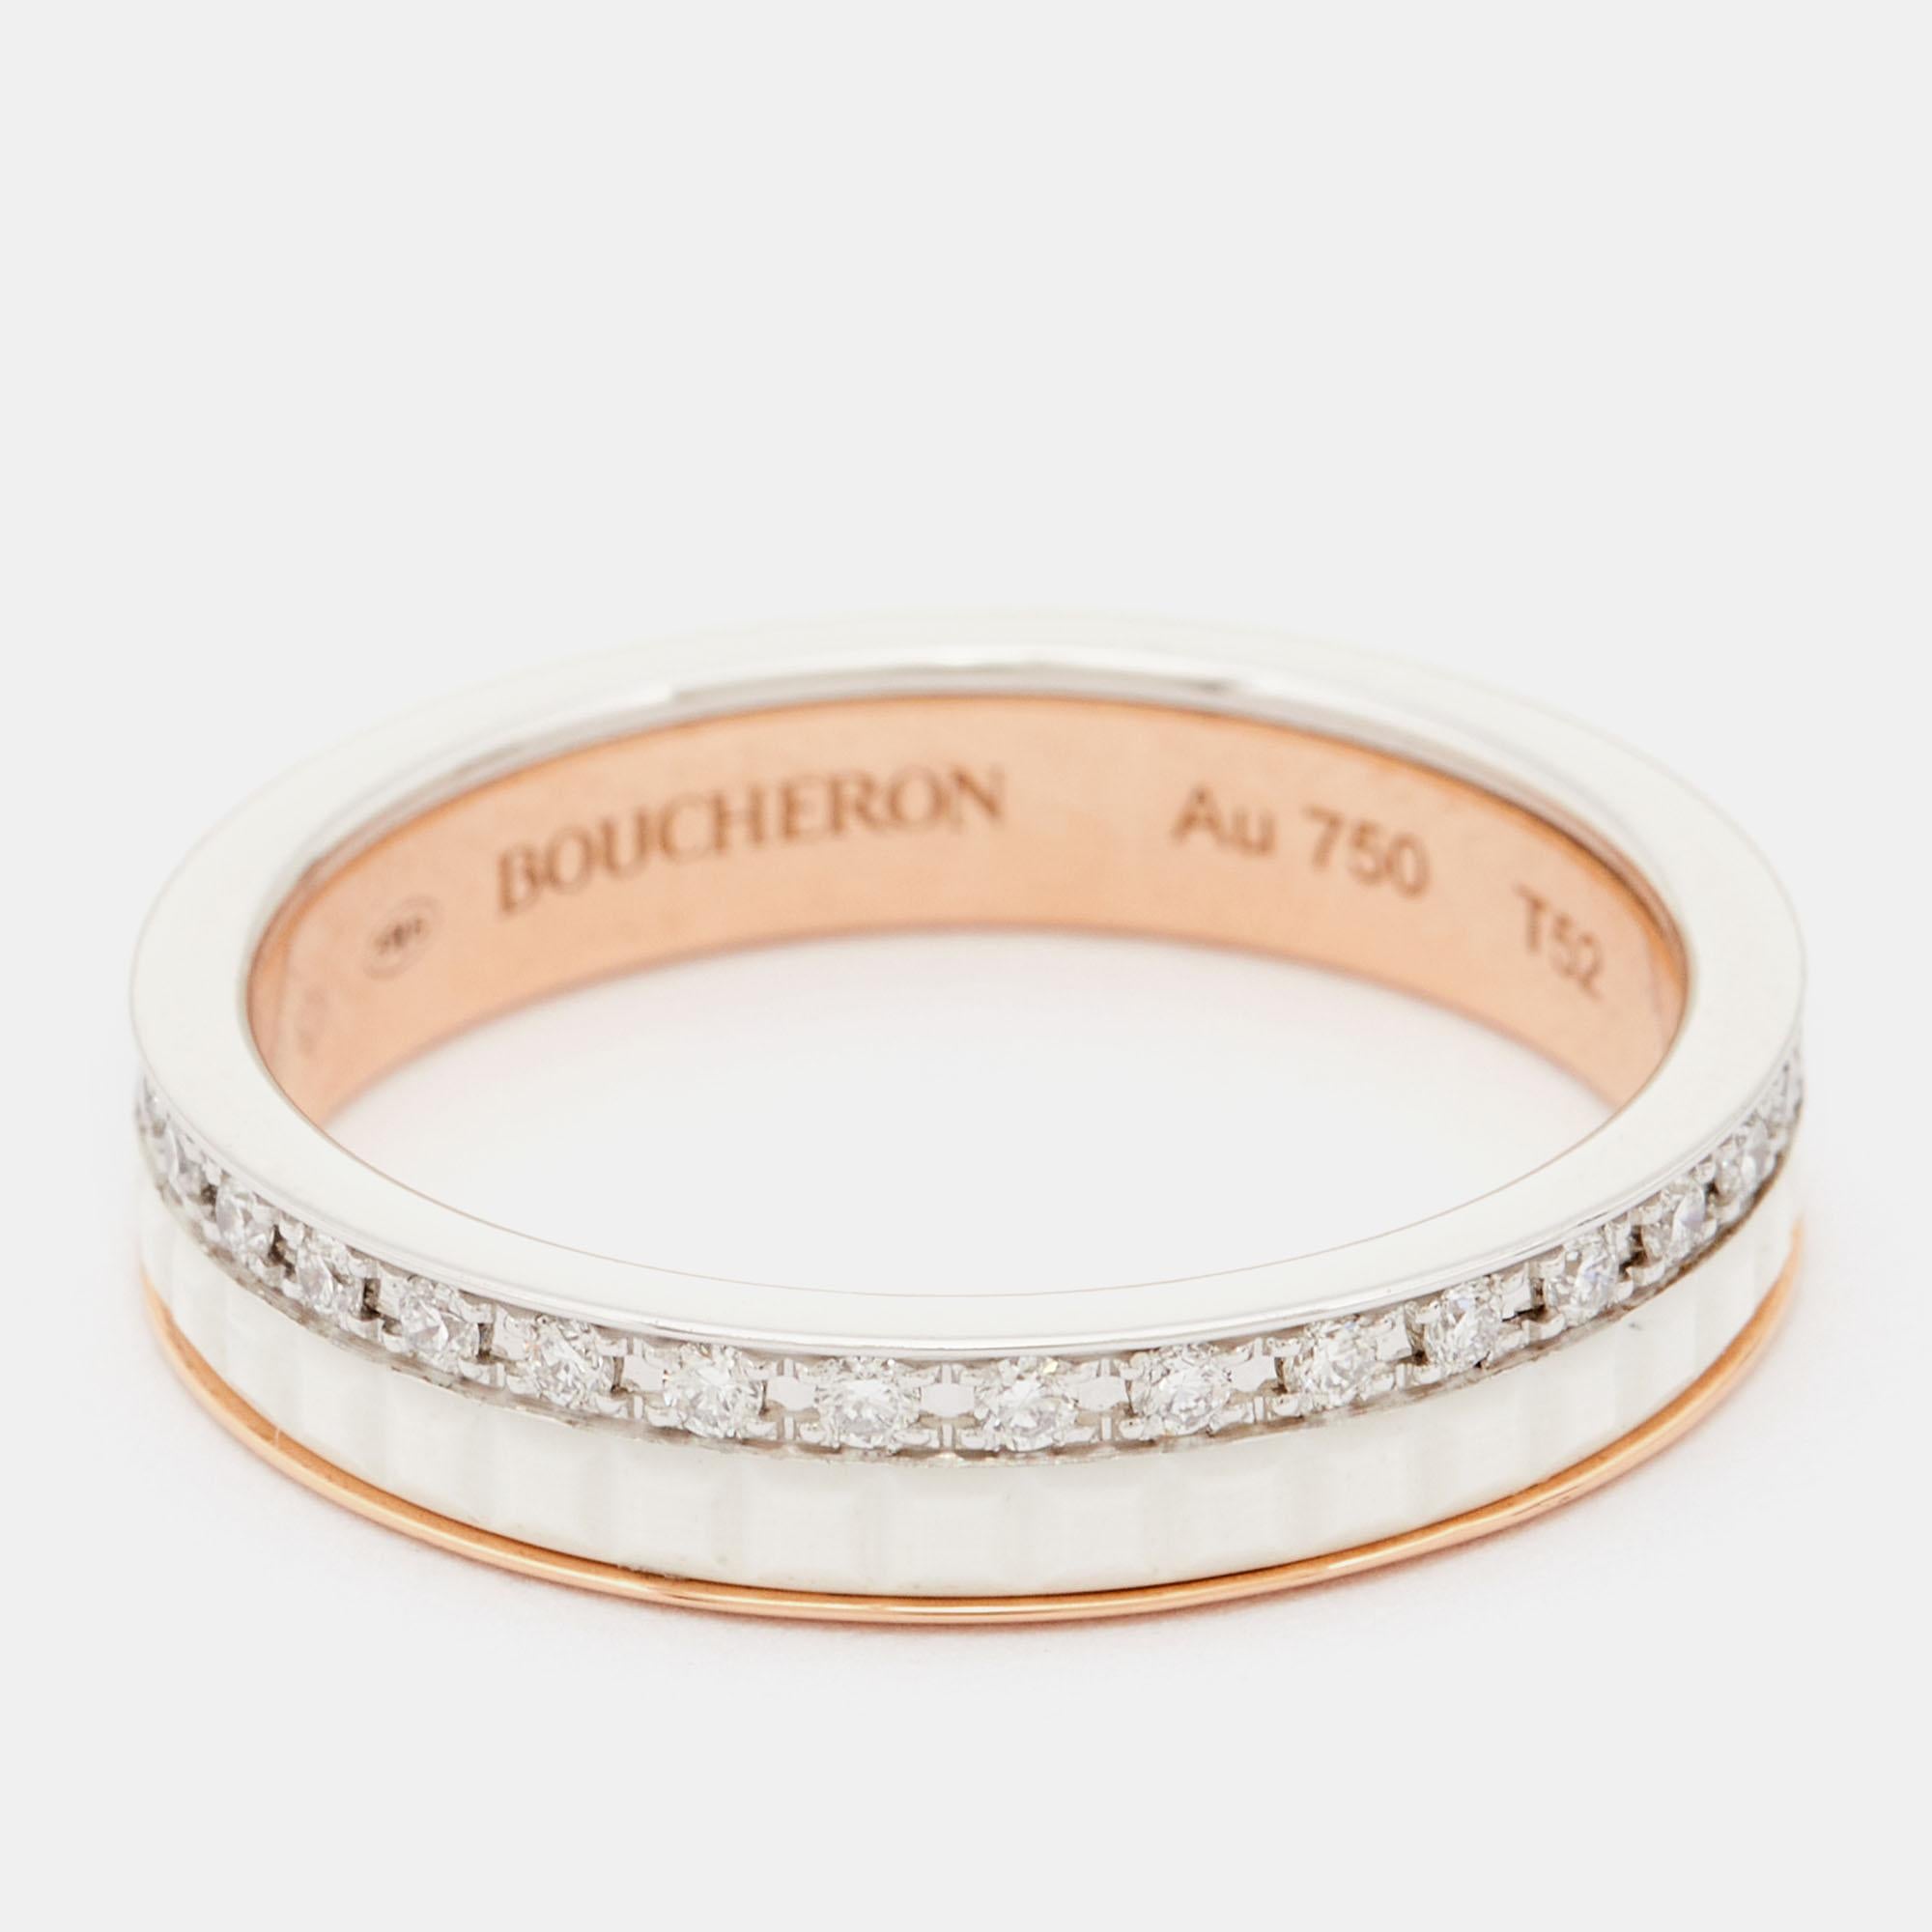 Boucheron's Quatre collection beautifully presents the spirit of the brand, exemplifying craftsmanship and an intricate play of textures and gold. The Quatre collection gifts you this ring arranged preciously in 18k two-tone gold, white ceramic, and